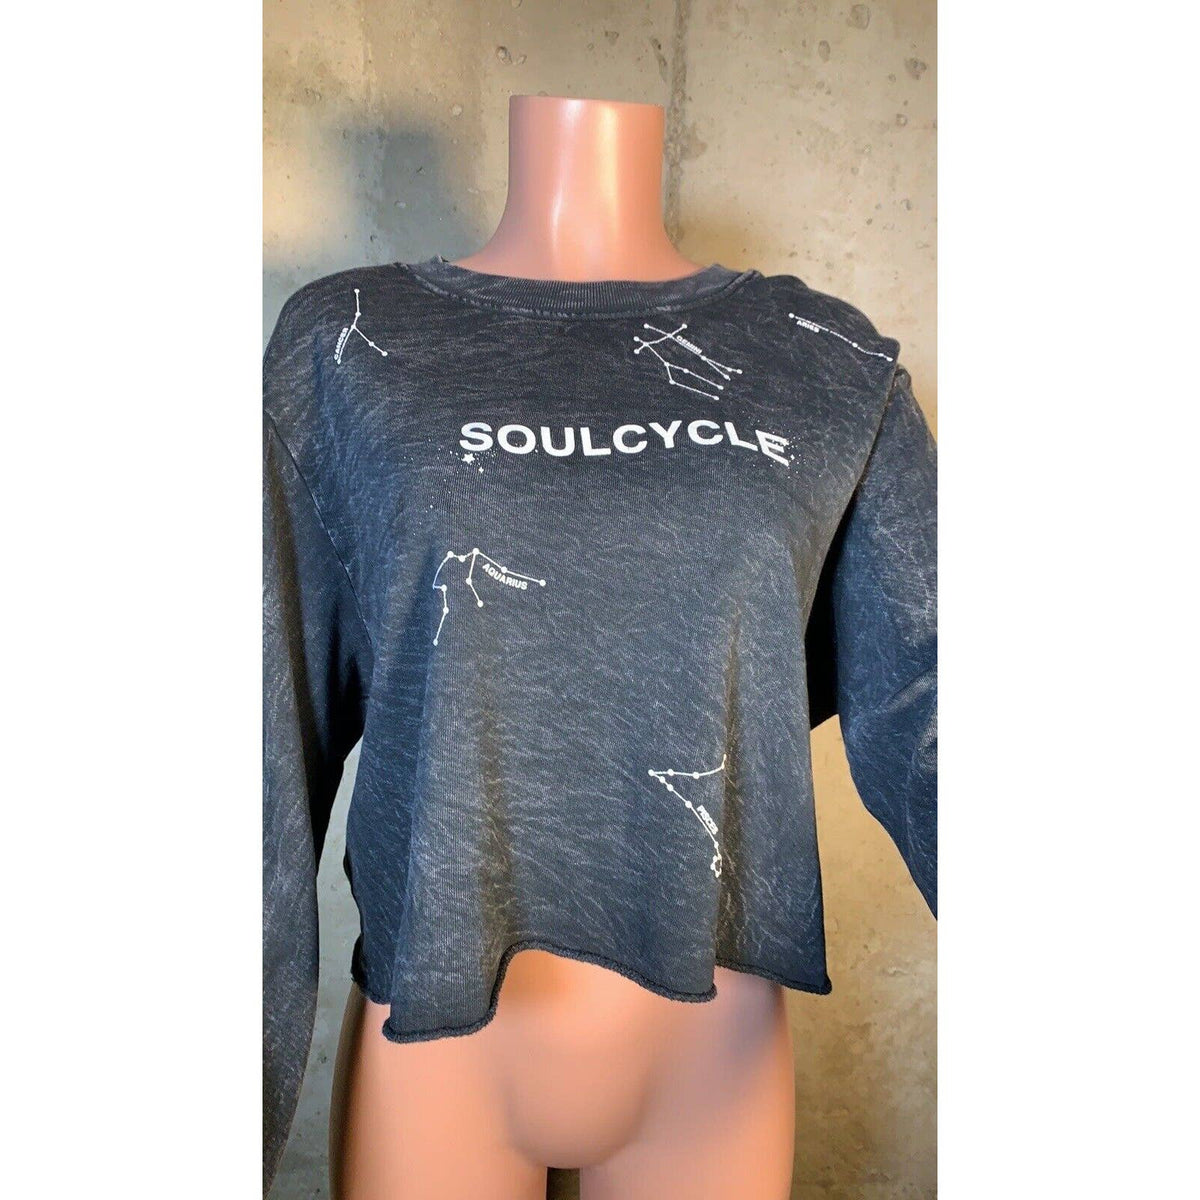 Lululemon Soul by Soulcycle Casey Cropped Astrology Signs Sweatshirt Sz. Medium